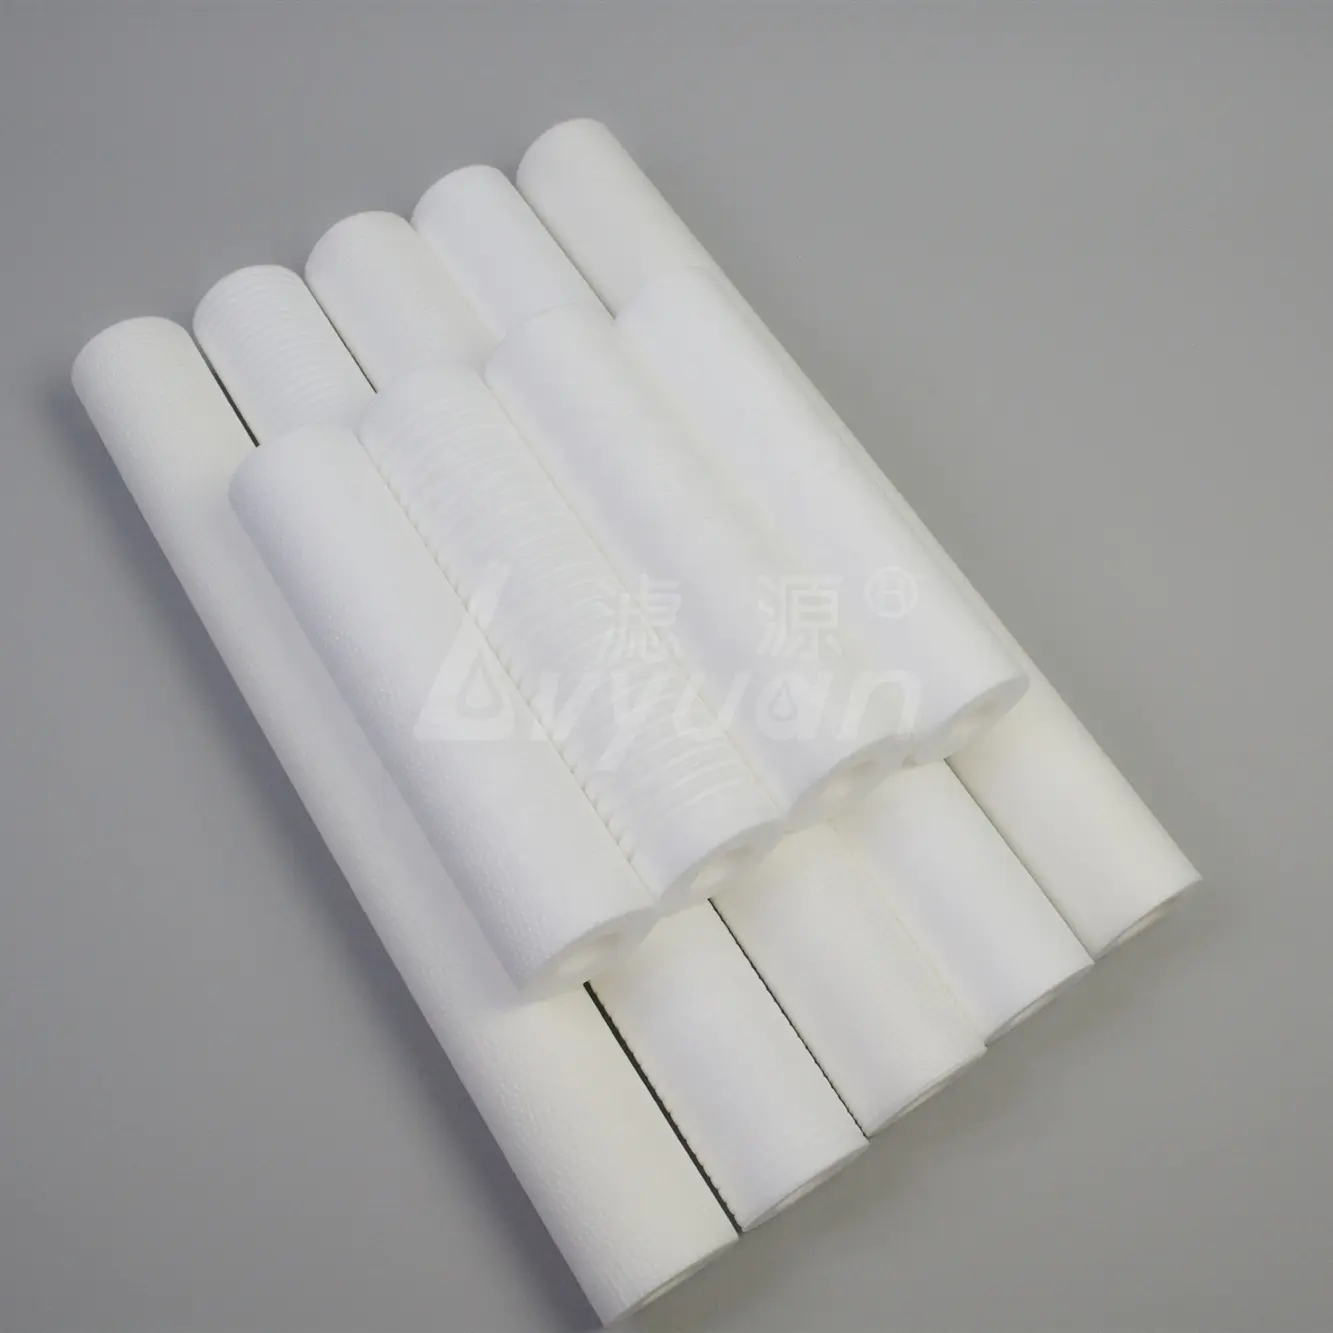 10 20 30 40 inch pp melt blown filter cartridge filter water with 1 3 5 micron